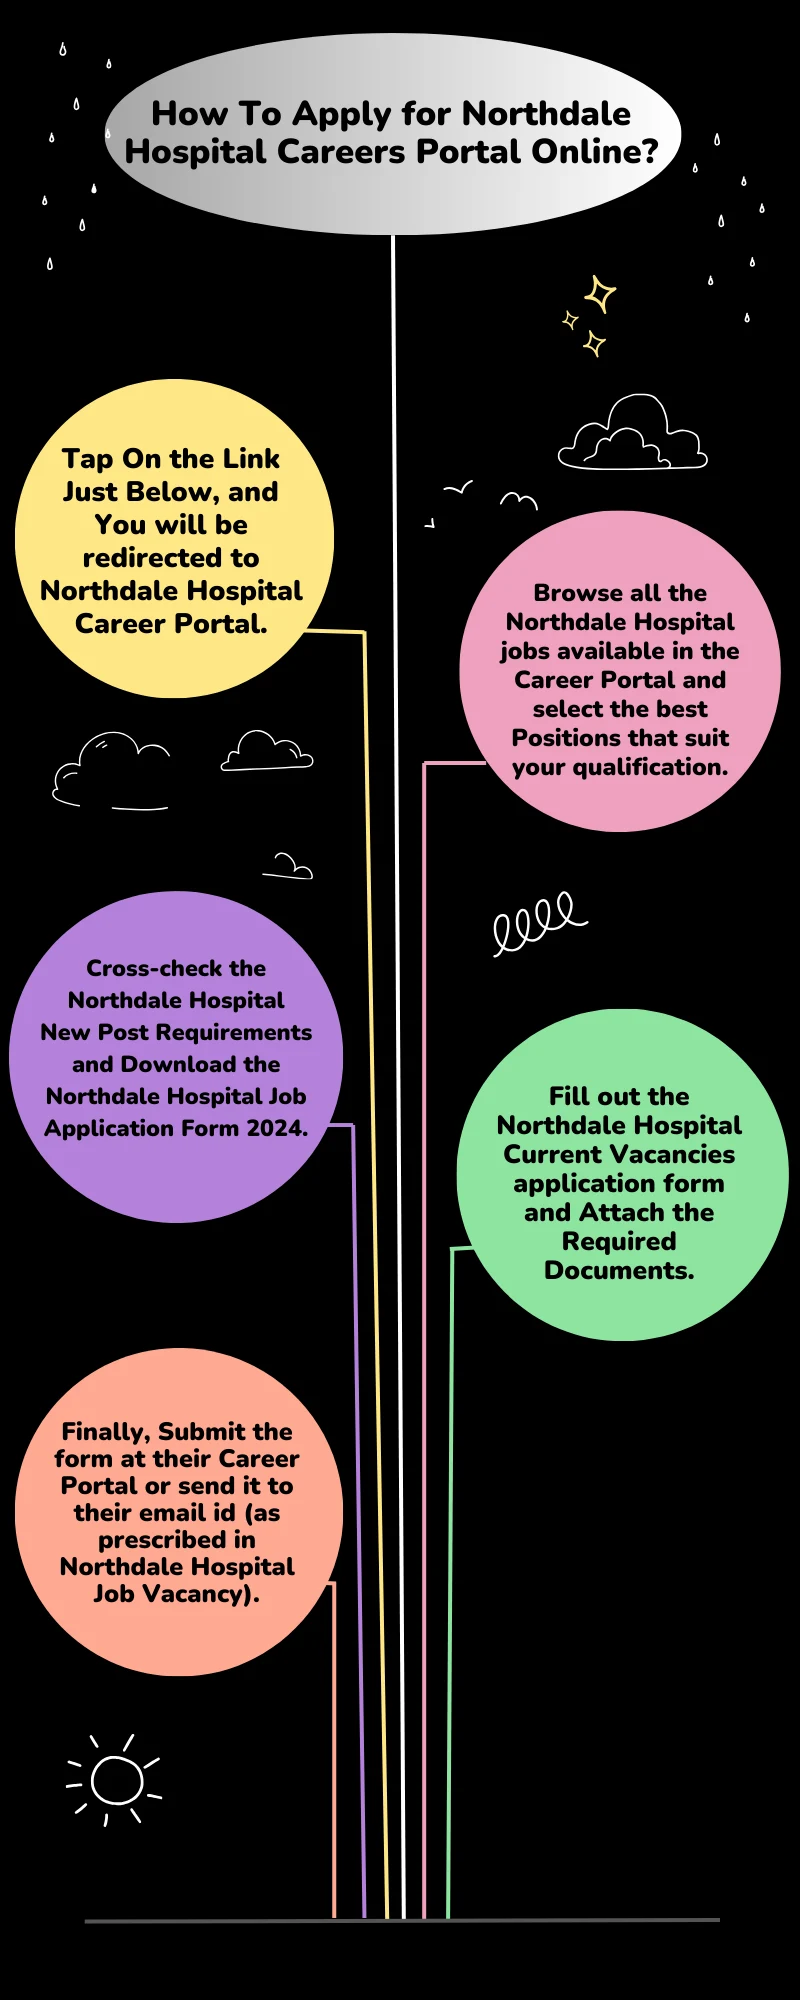 How To Apply for Northdale Hospital Careers Portal Online?